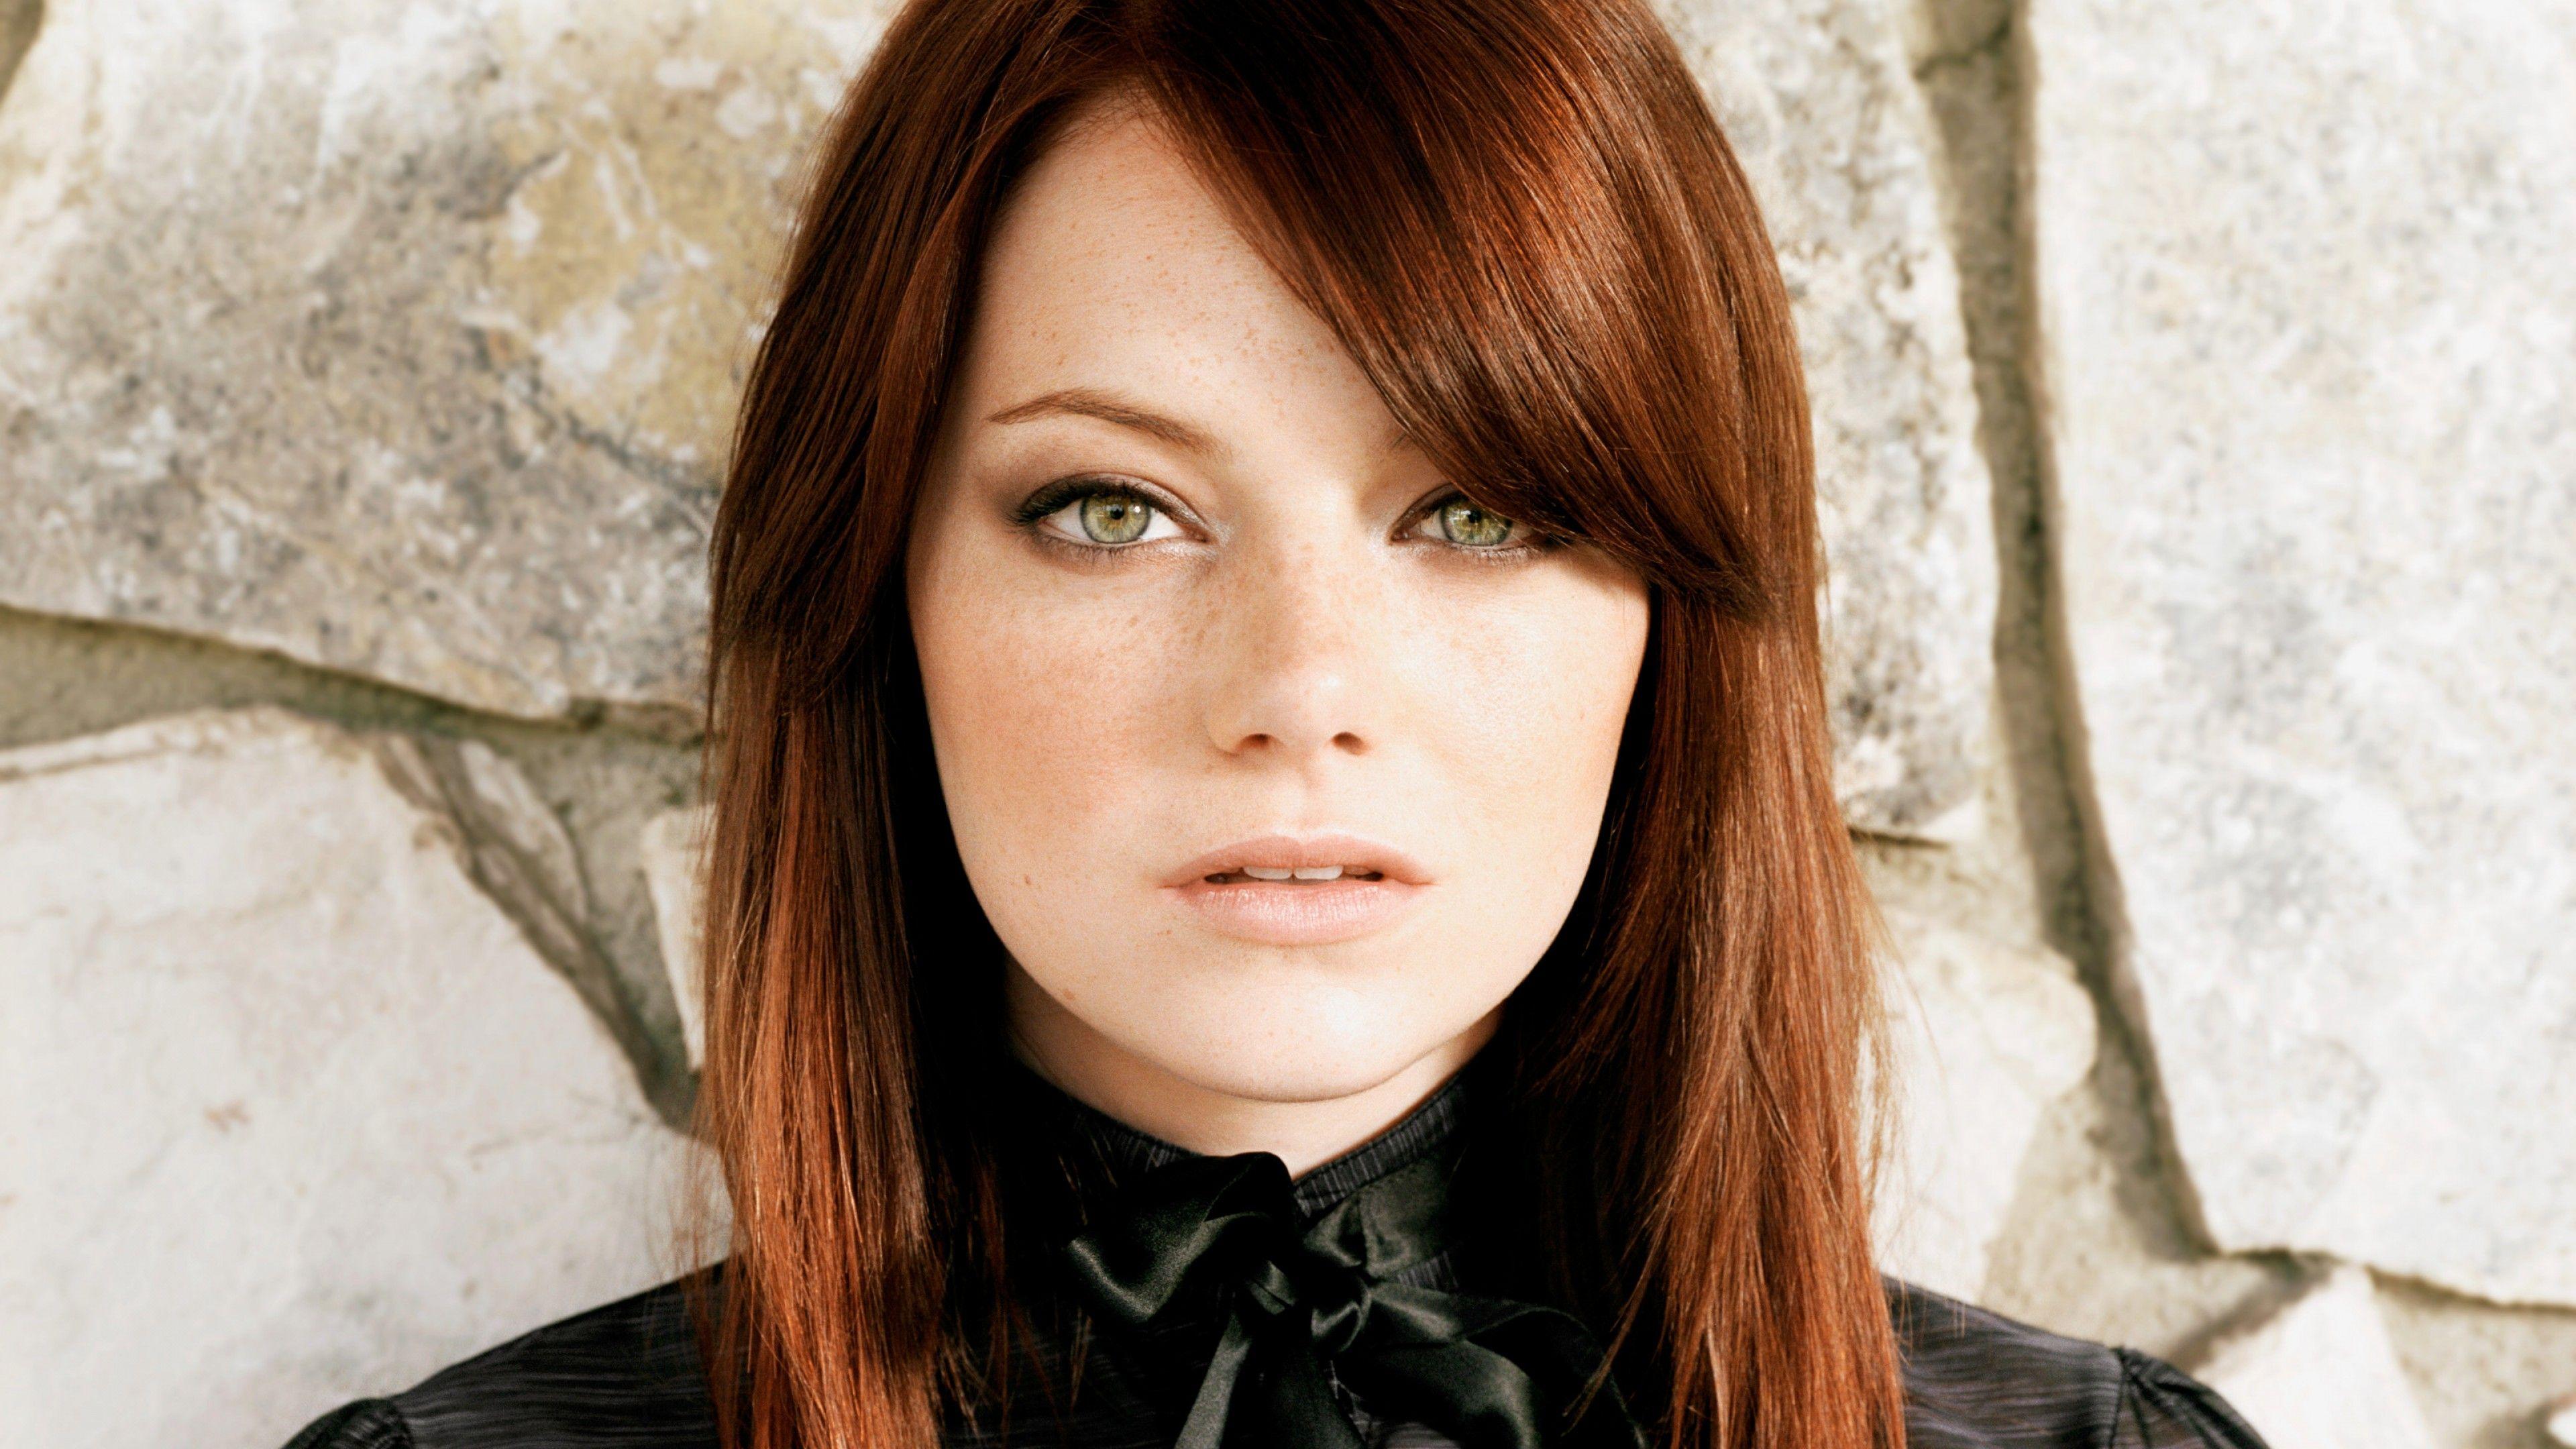 Emma Stone 2017 Wallpapers